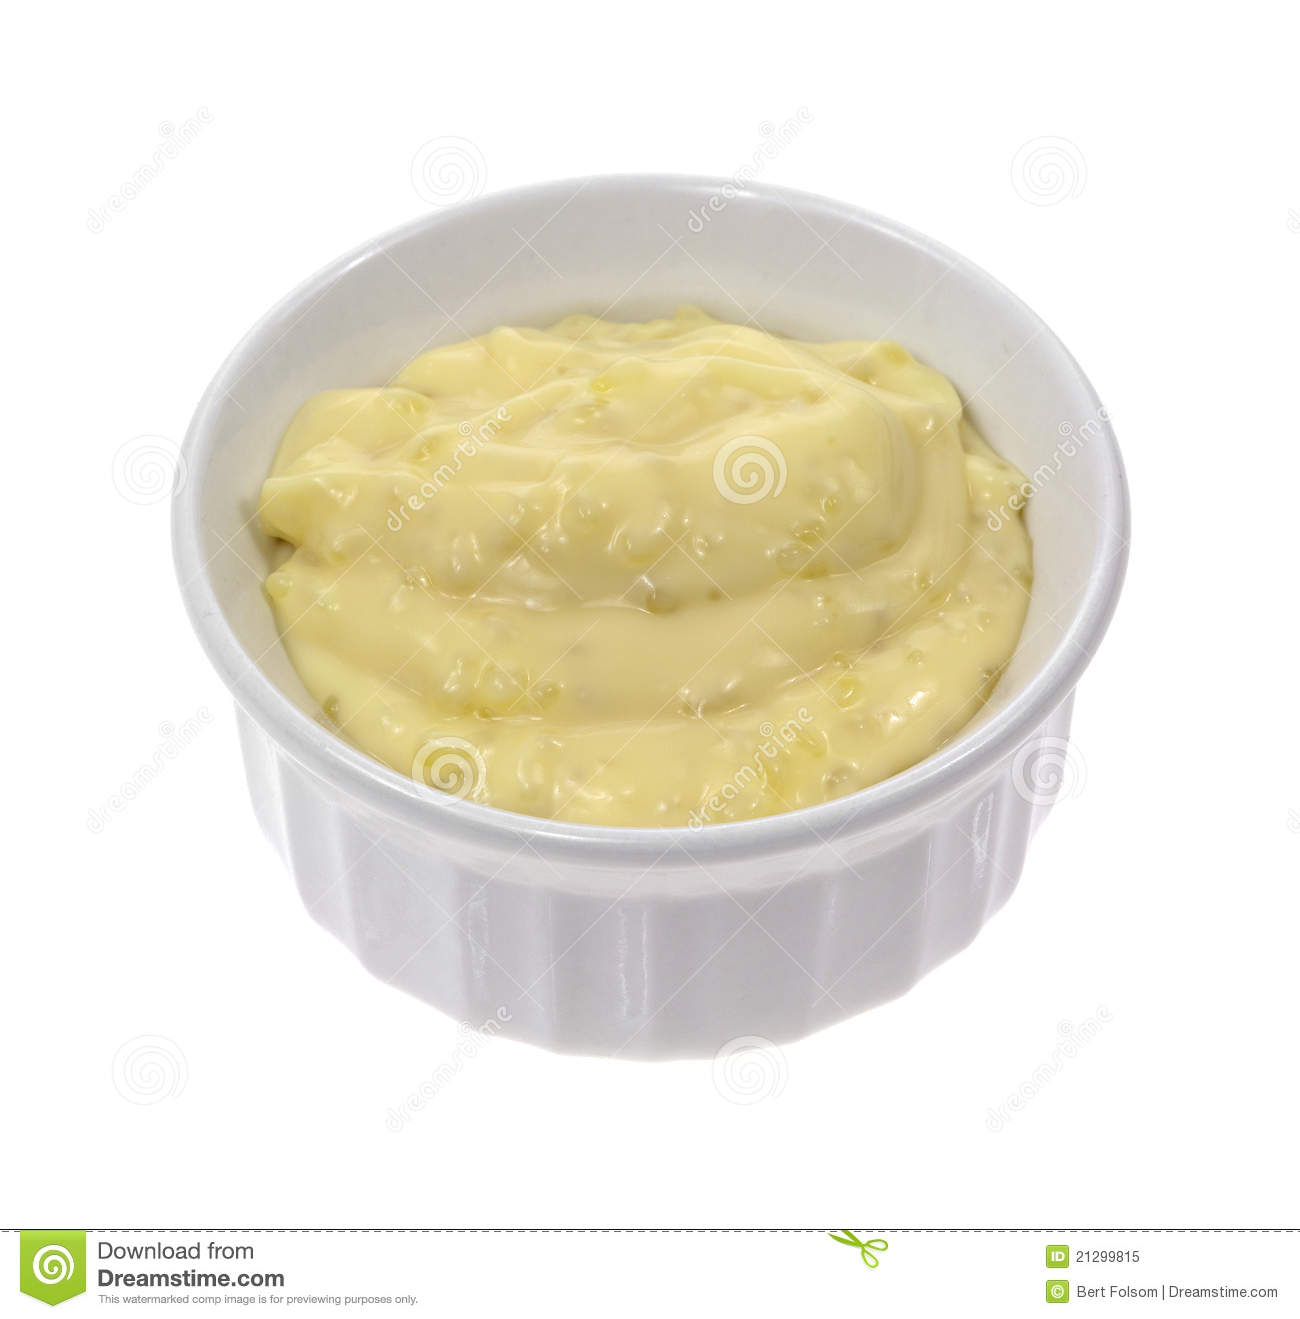 Tapioca Pudding In Small Bowl Royalty Free Stock Photo   Image